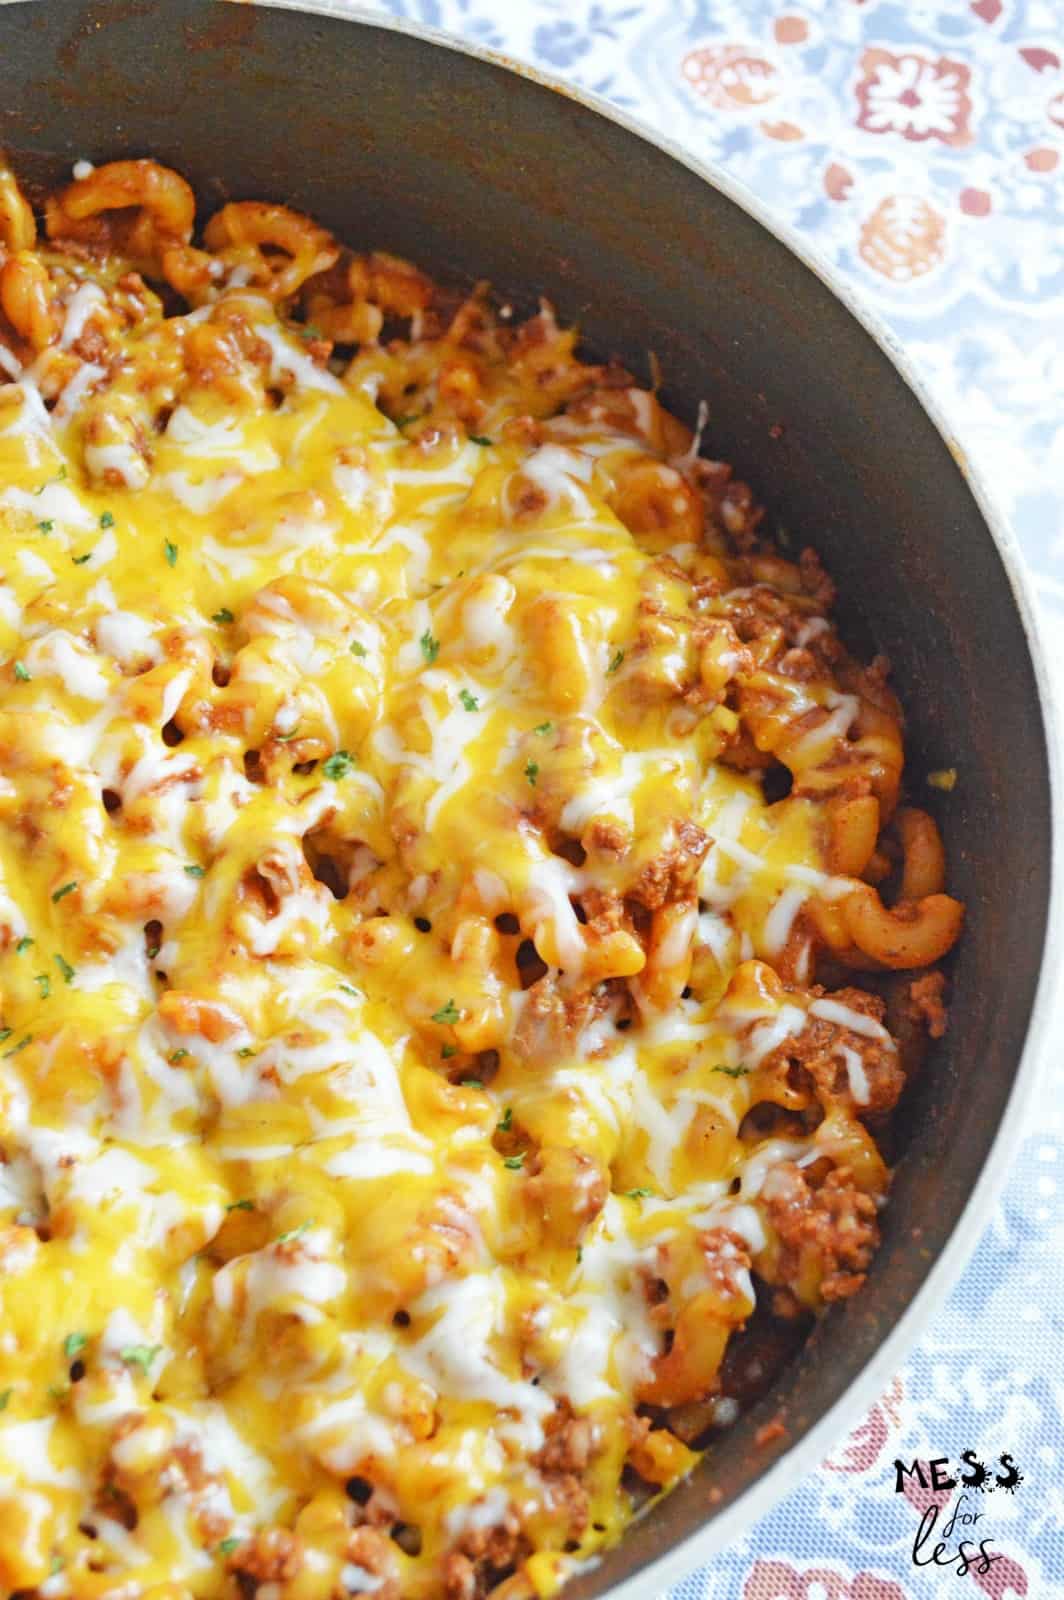 chili mac and cheese in a pot